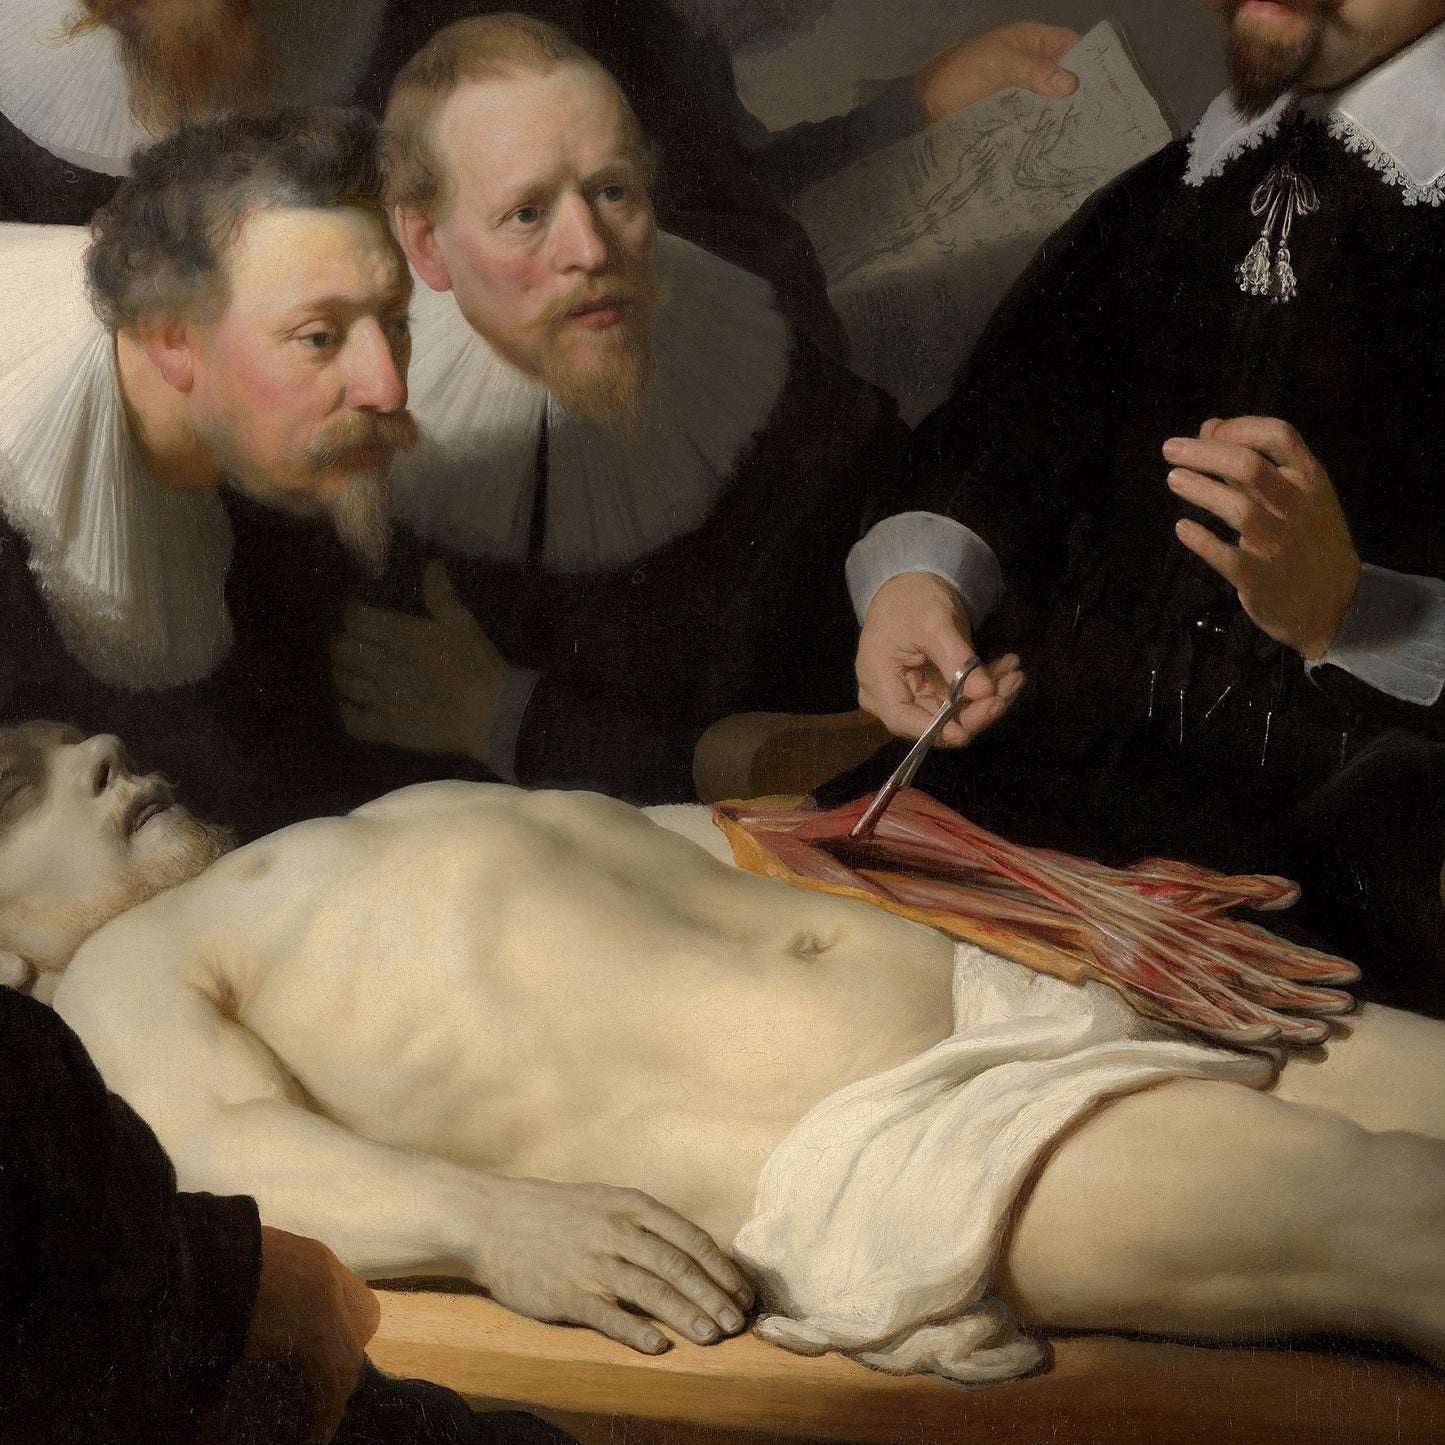 The Anatomy Lesson of Dr Nicolaes Tulp by Rembrandt, 3d Printed with texture and brush strokes looks like original oil-painting, code:481